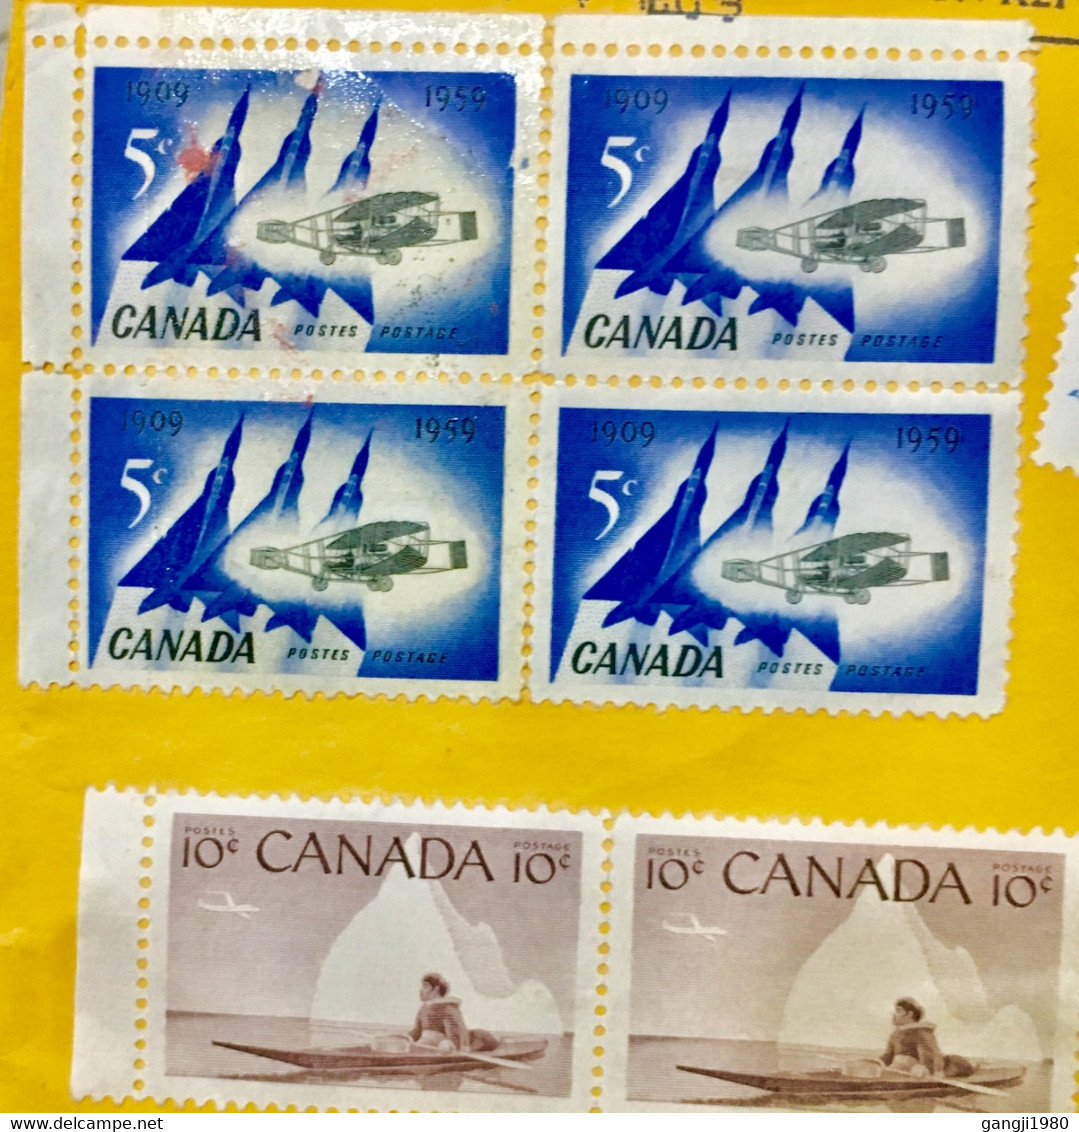 CANADA 2008, COVER 31 STAMPS ALL WITHOUT CANCELLATION ,BOOKLET PANE ,BLOCK ,FLOWER SHIP ,AEROPLANE ,CHIRSTMAS ,BOAT RACE - Lettres & Documents